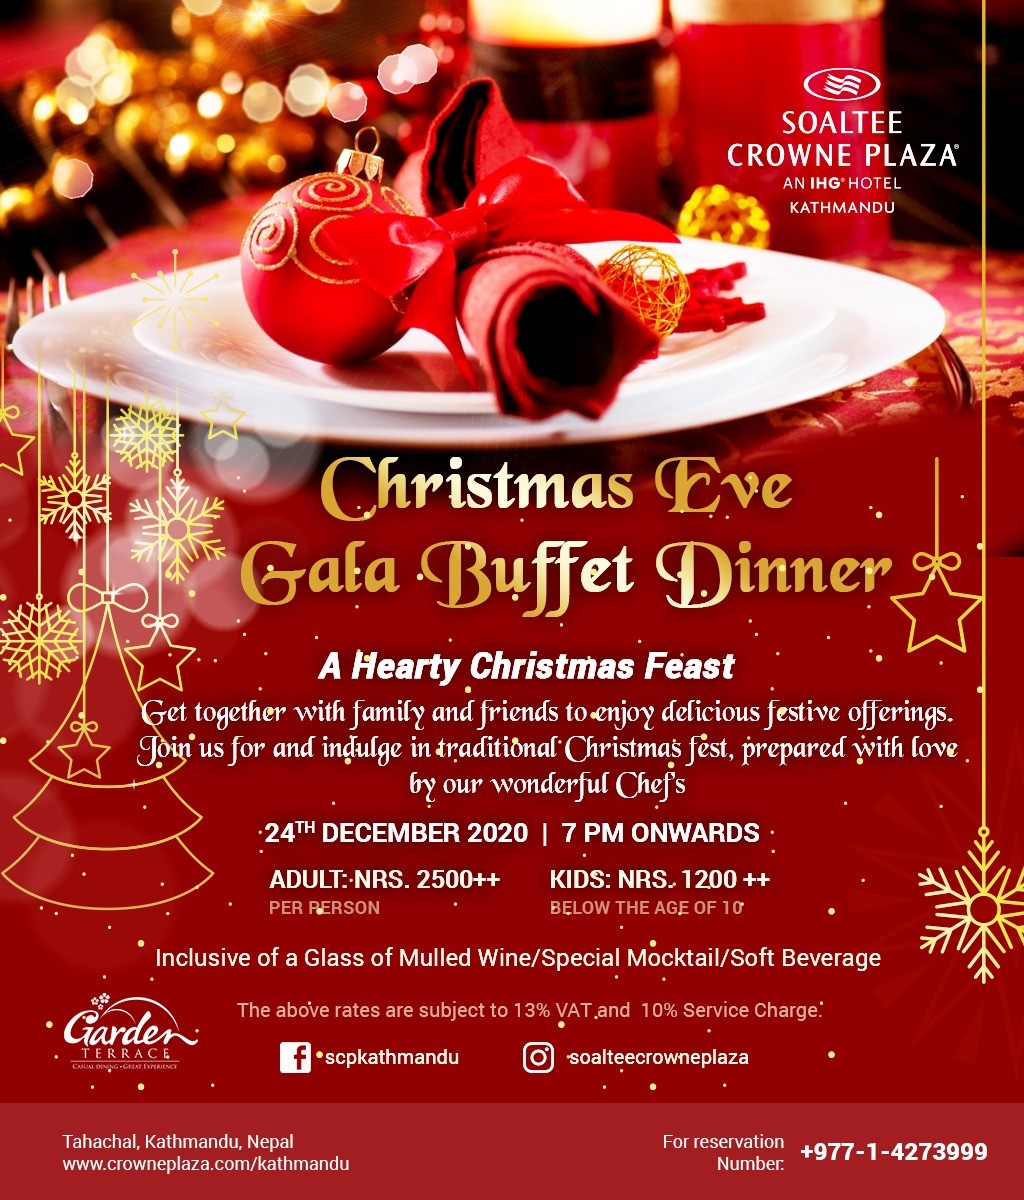 "Christmas Eve Gala Dinner 2020" - A Special Offer By Soaltee Crowne Plaza